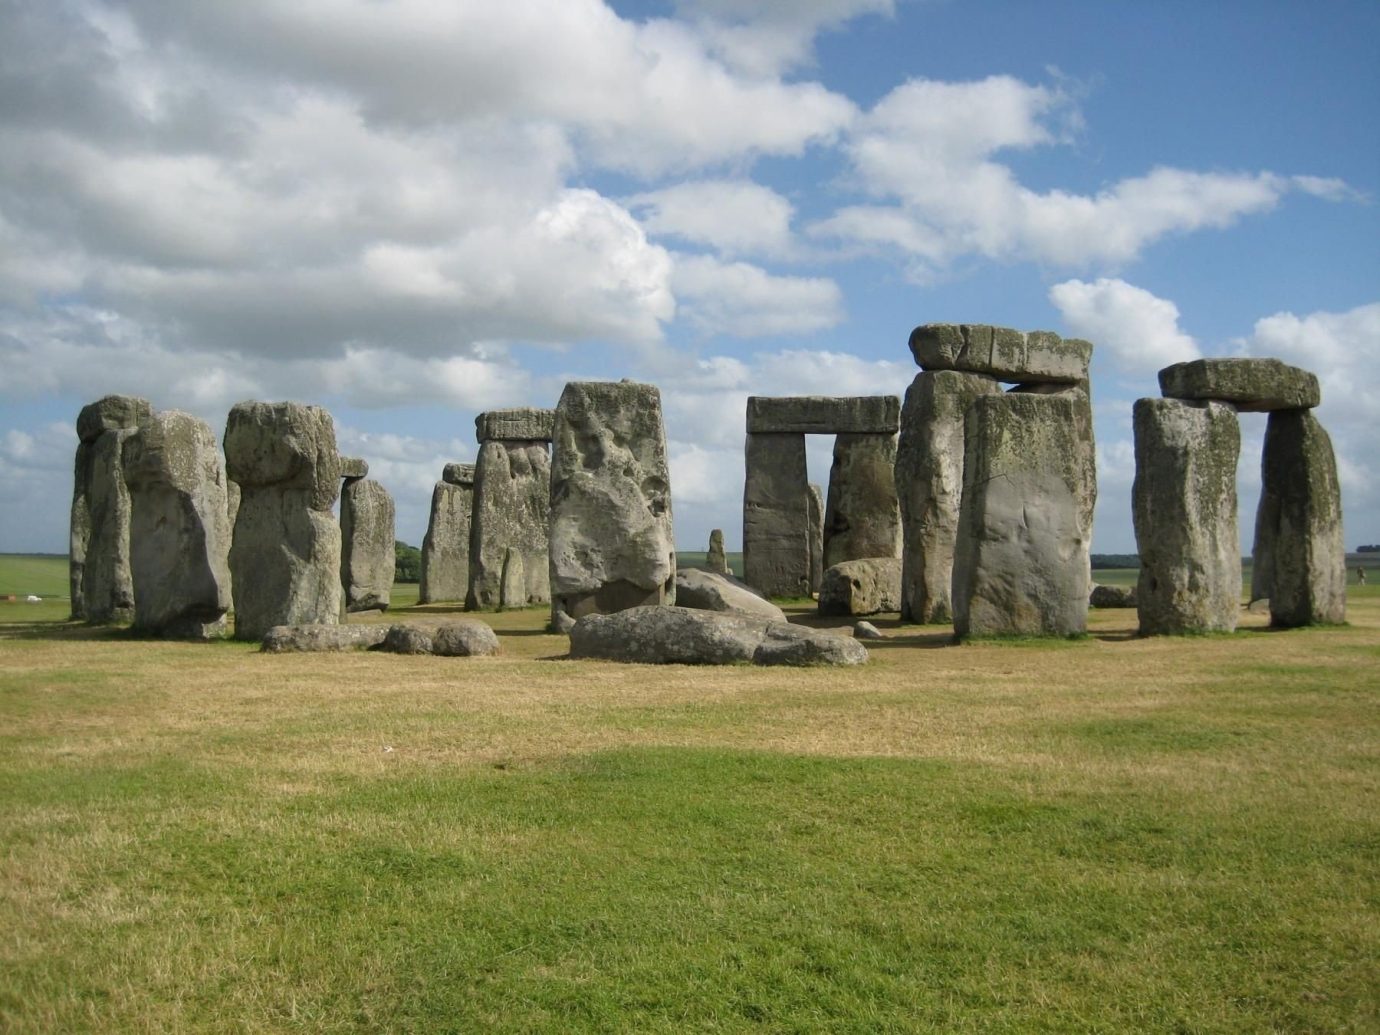 Road Trips Trip Ideas grass building sky outdoor megalith Ruins rock structure archaeological site ancient history stone monolith monument